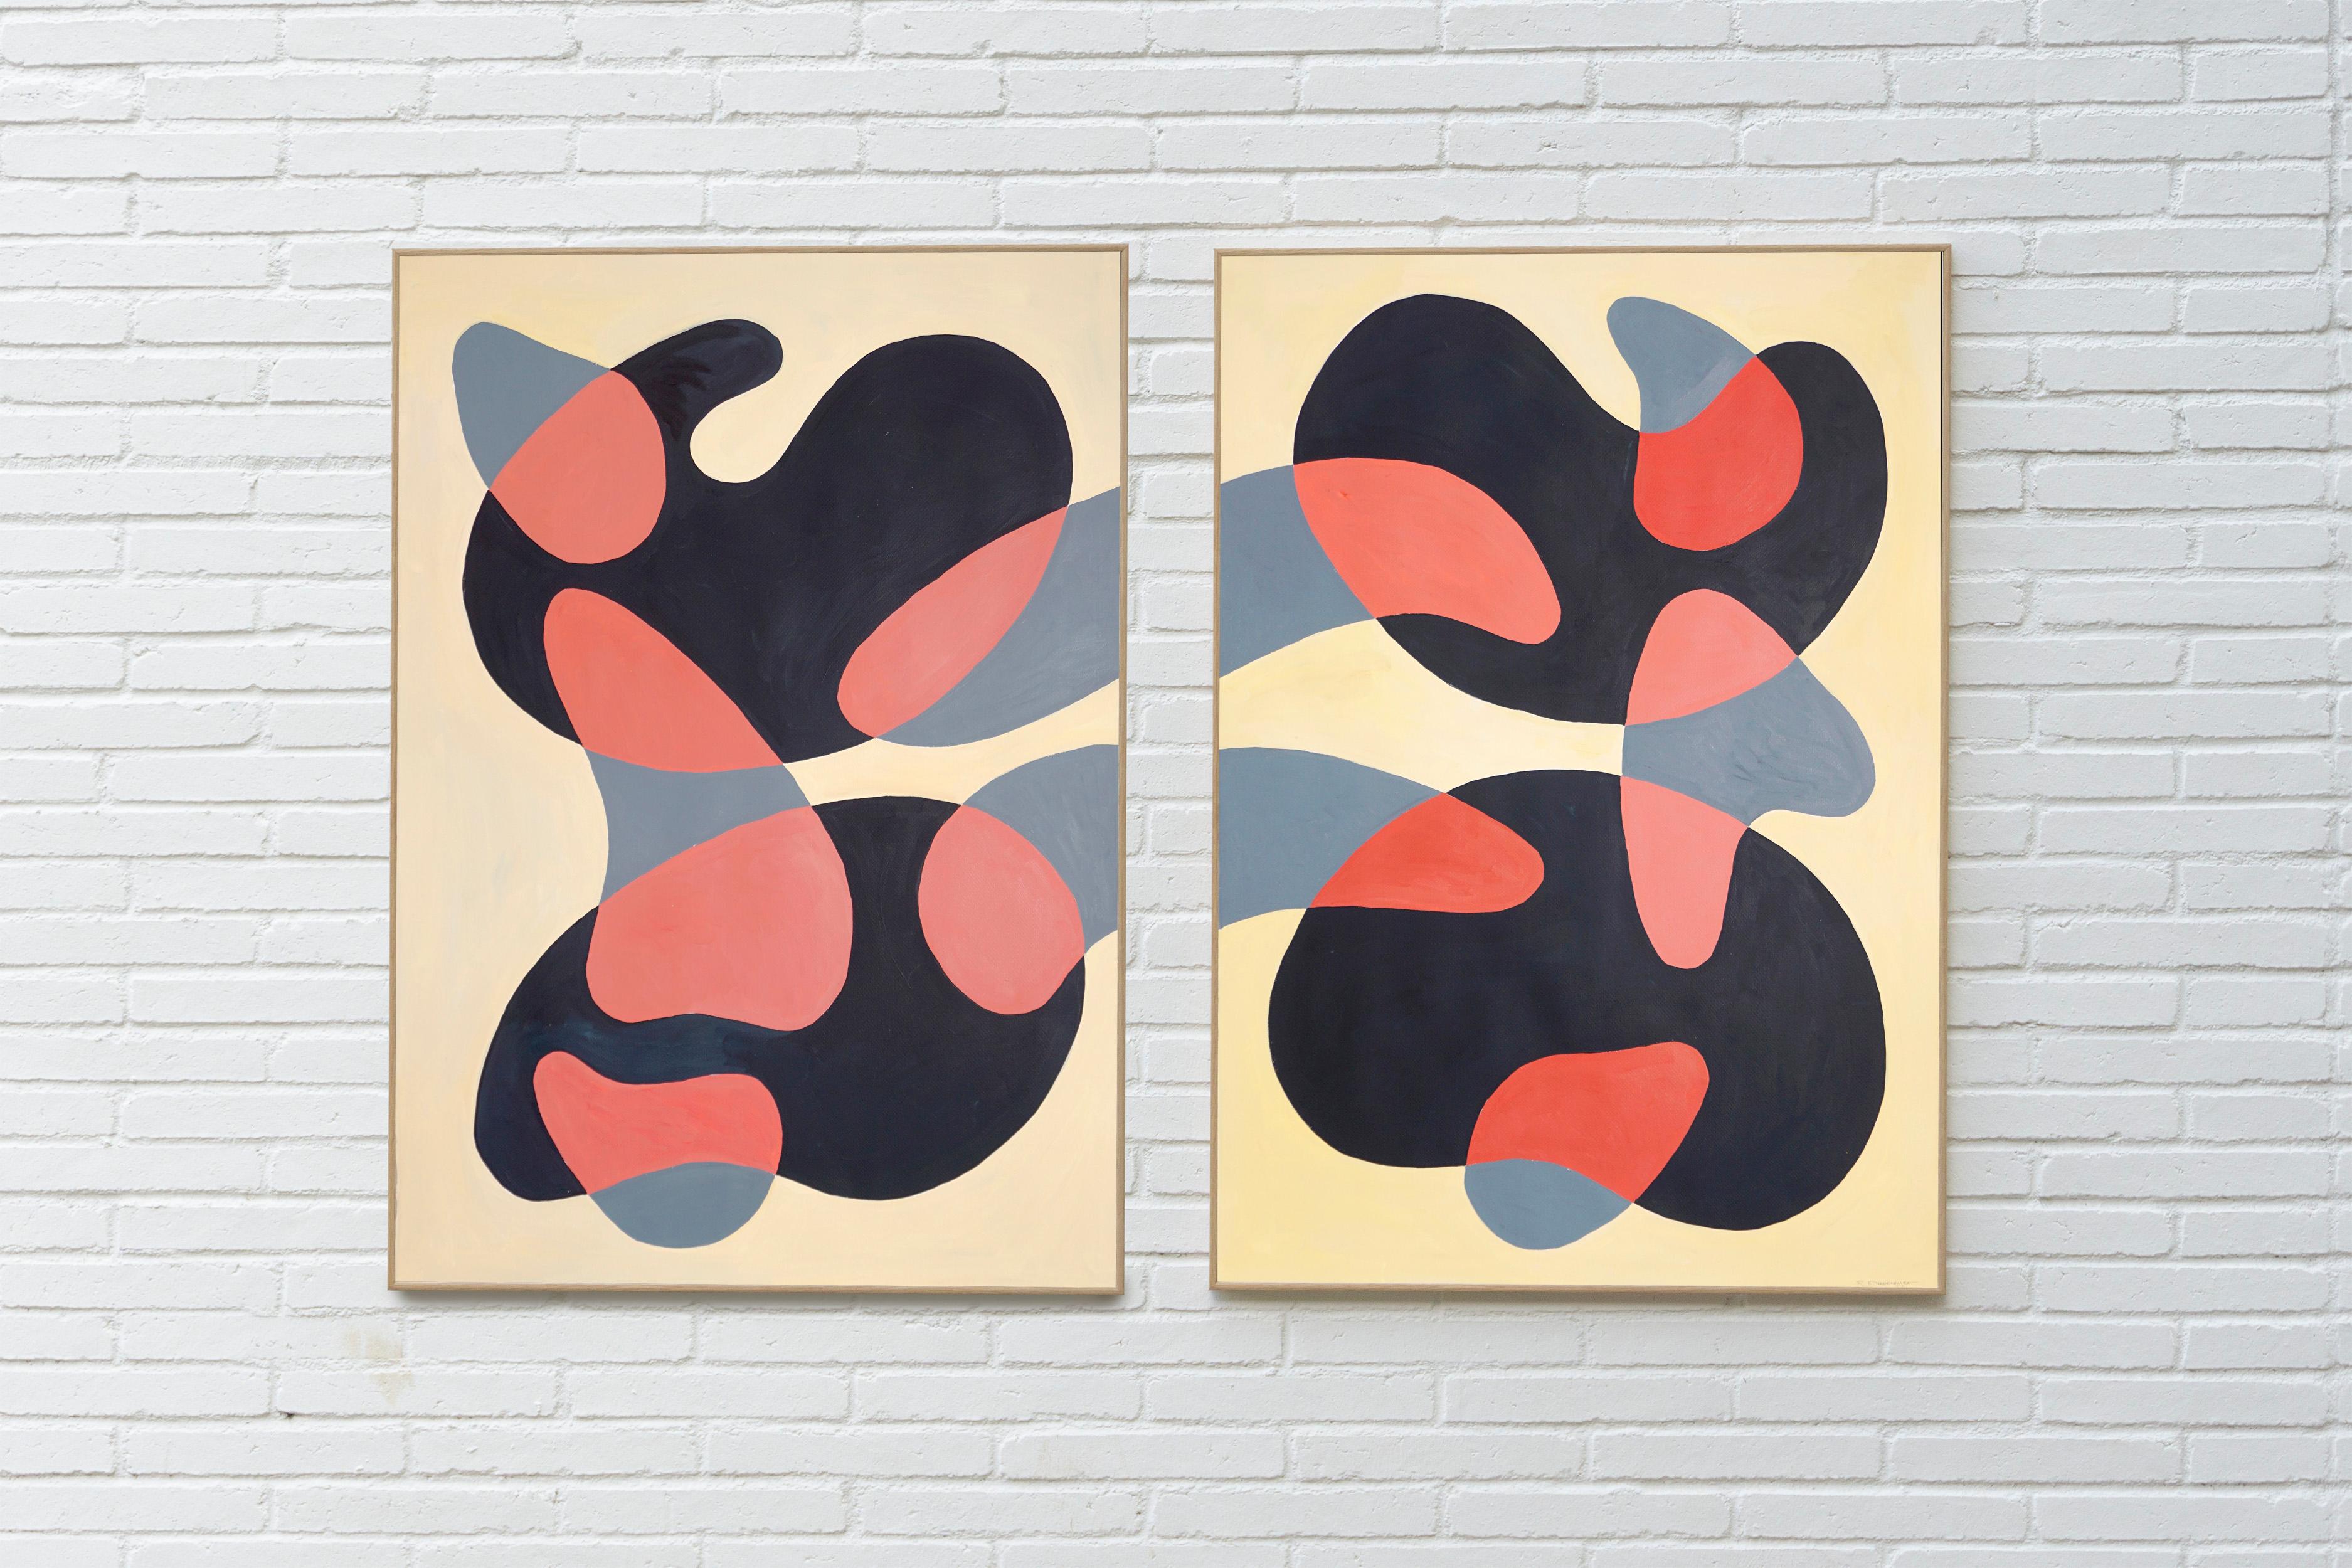 Lights and Shadows, Mid-Century Modern Abstract Shapes Diptych, Black, Red Gray  3